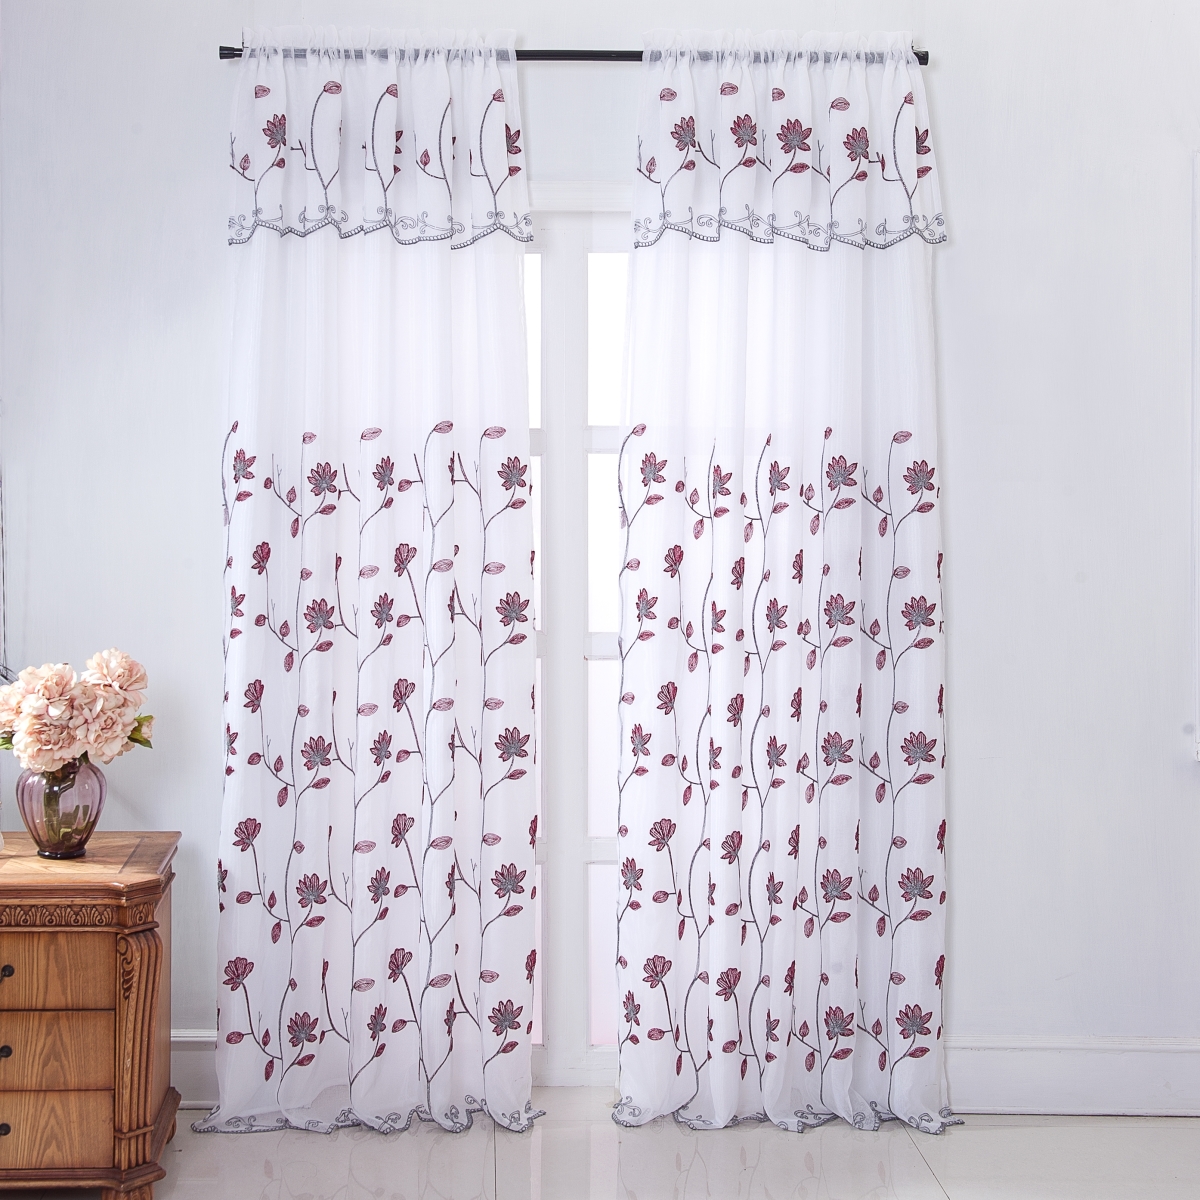 Pnr19213 Ruby Floral Embroidered Rod Pocket Single Curtain Panel In Burgundy - 54 X 90 In.